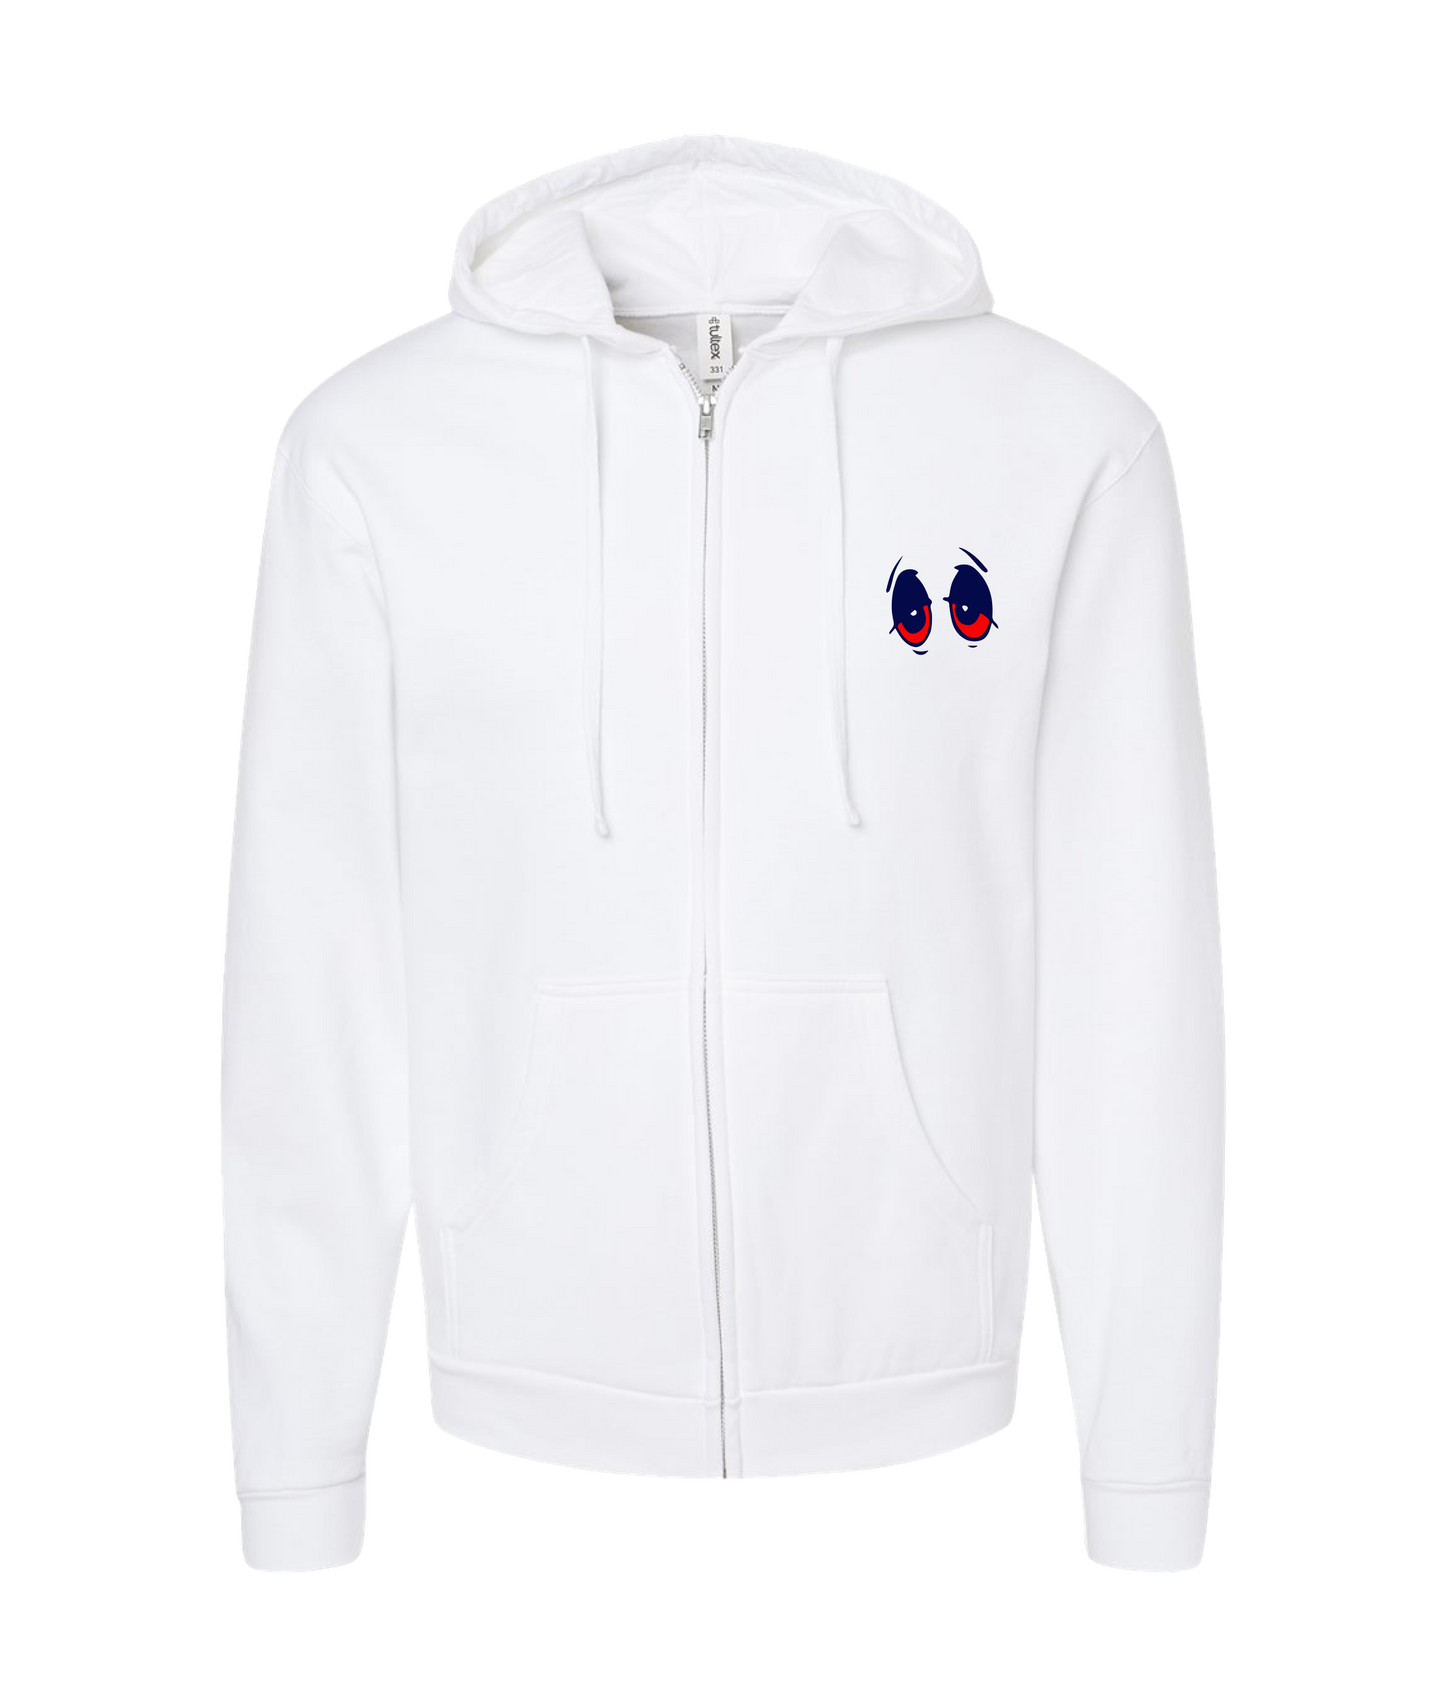 Zooted Clothing - EYES - White Zip Up Hoodie